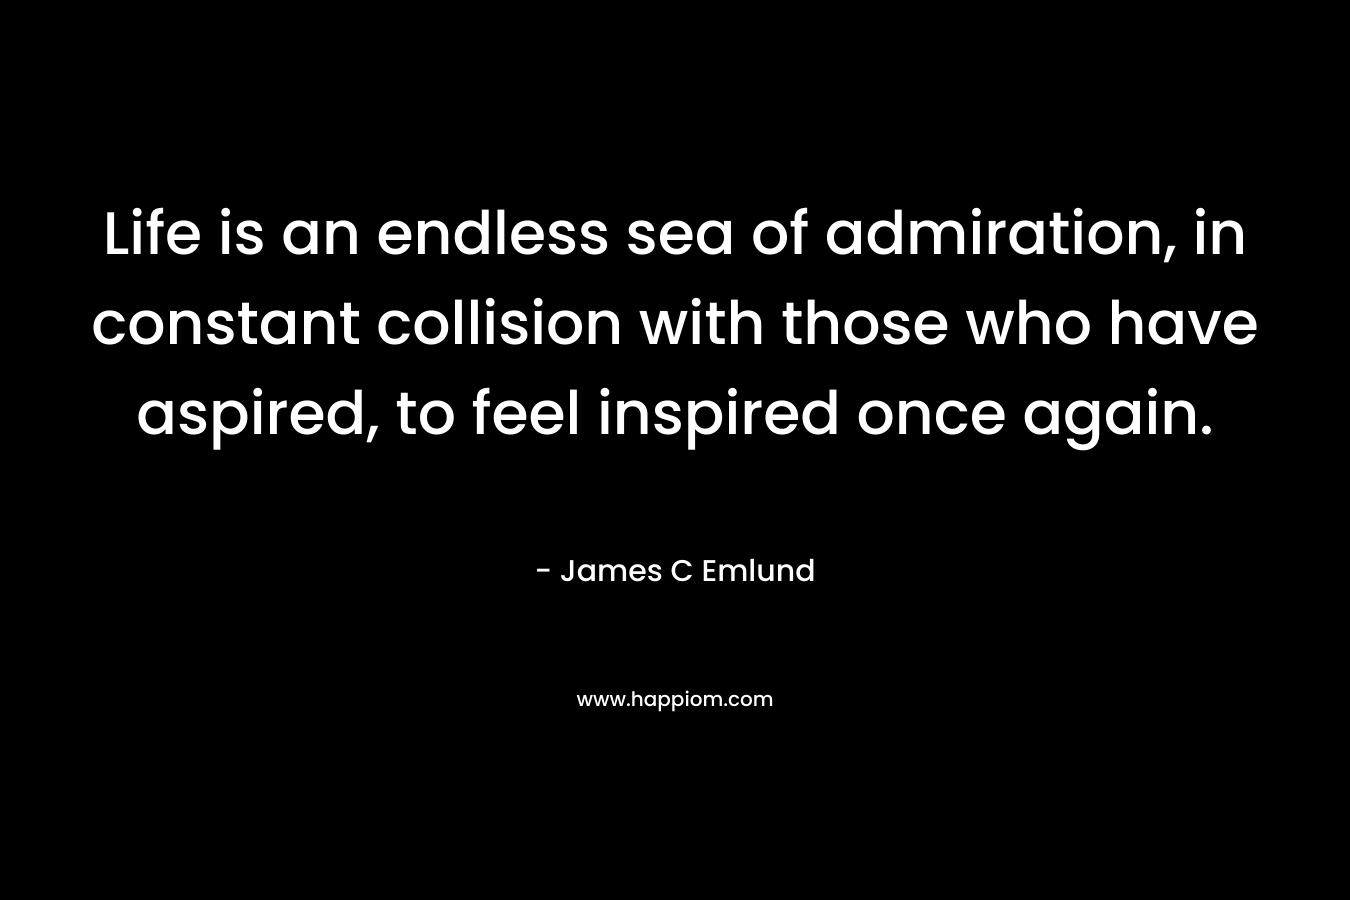 Life is an endless sea of admiration, in constant collision with those who have aspired, to feel inspired once again. – James C Emlund